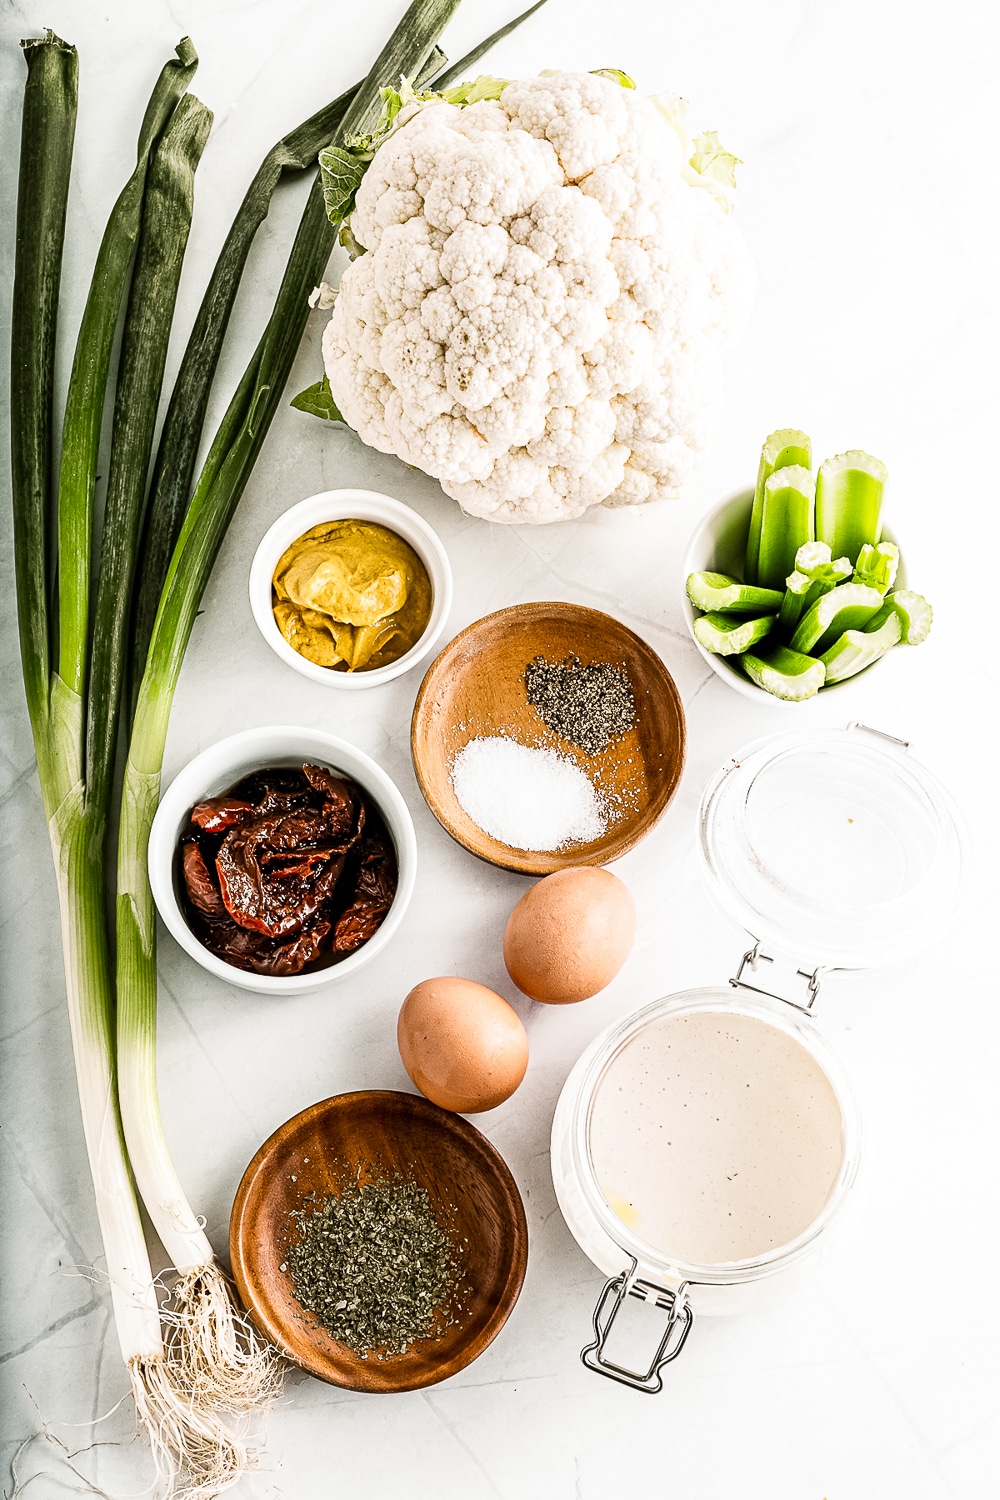 ingredients in bowls for salad with cauliflower and eggs